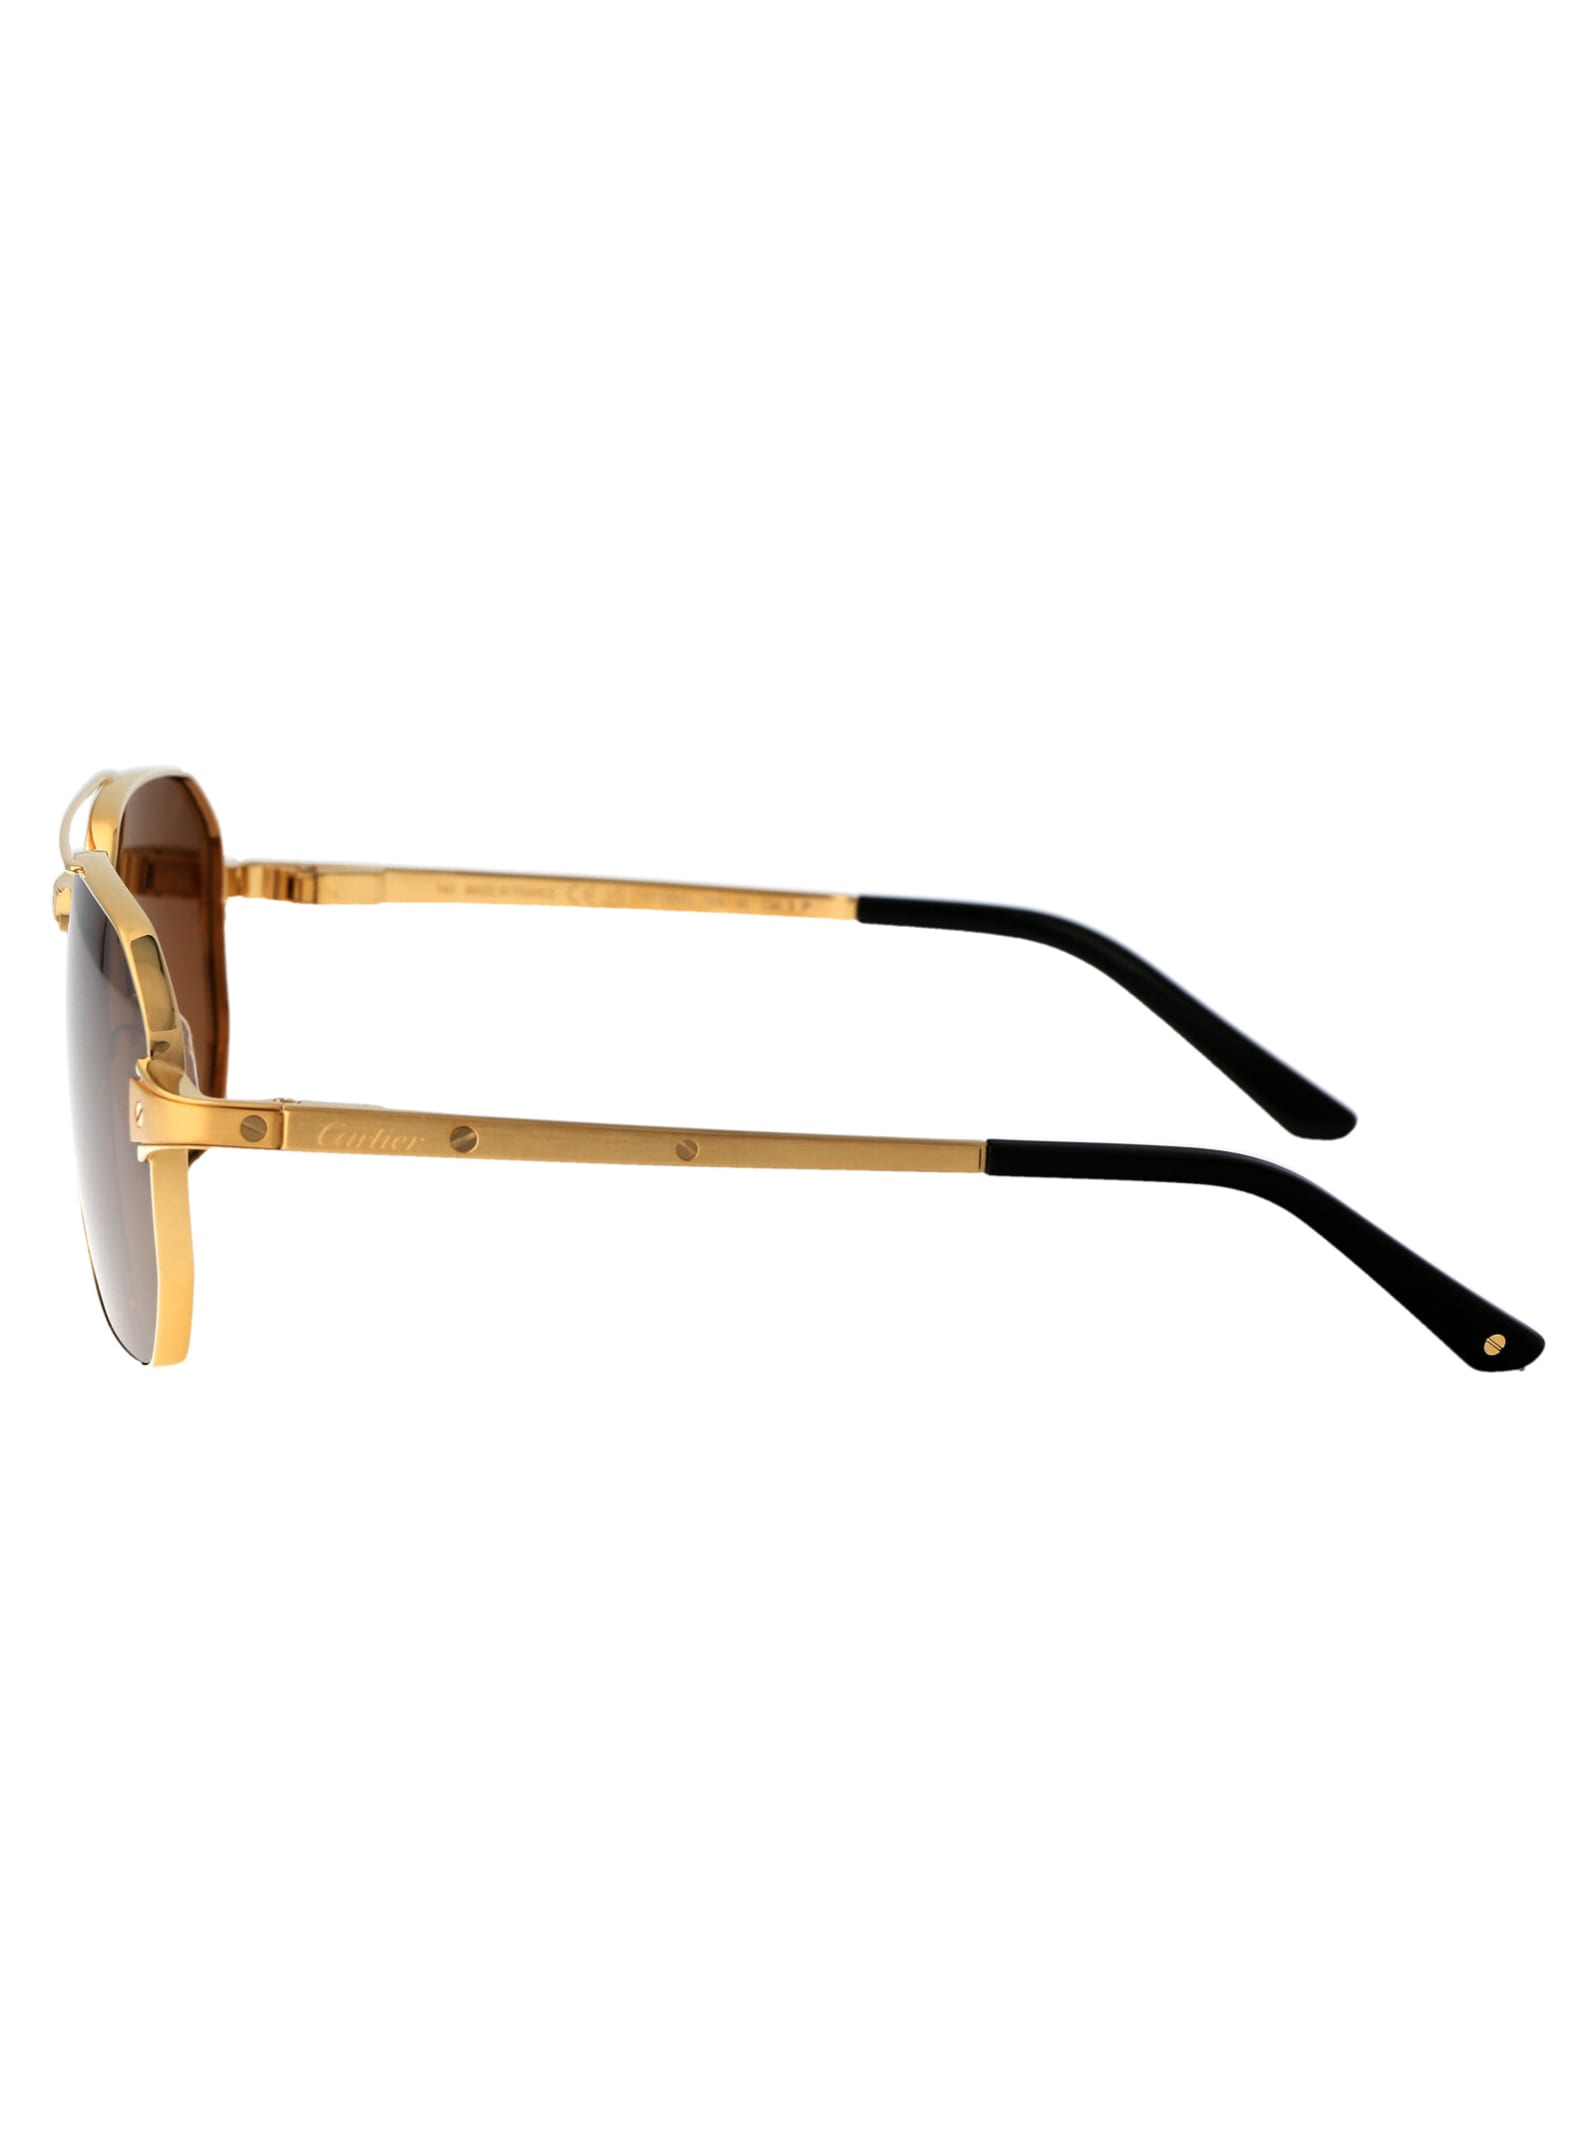 Shop Cartier Ct0424s Sunglasses In 003 Gold Gold Brown